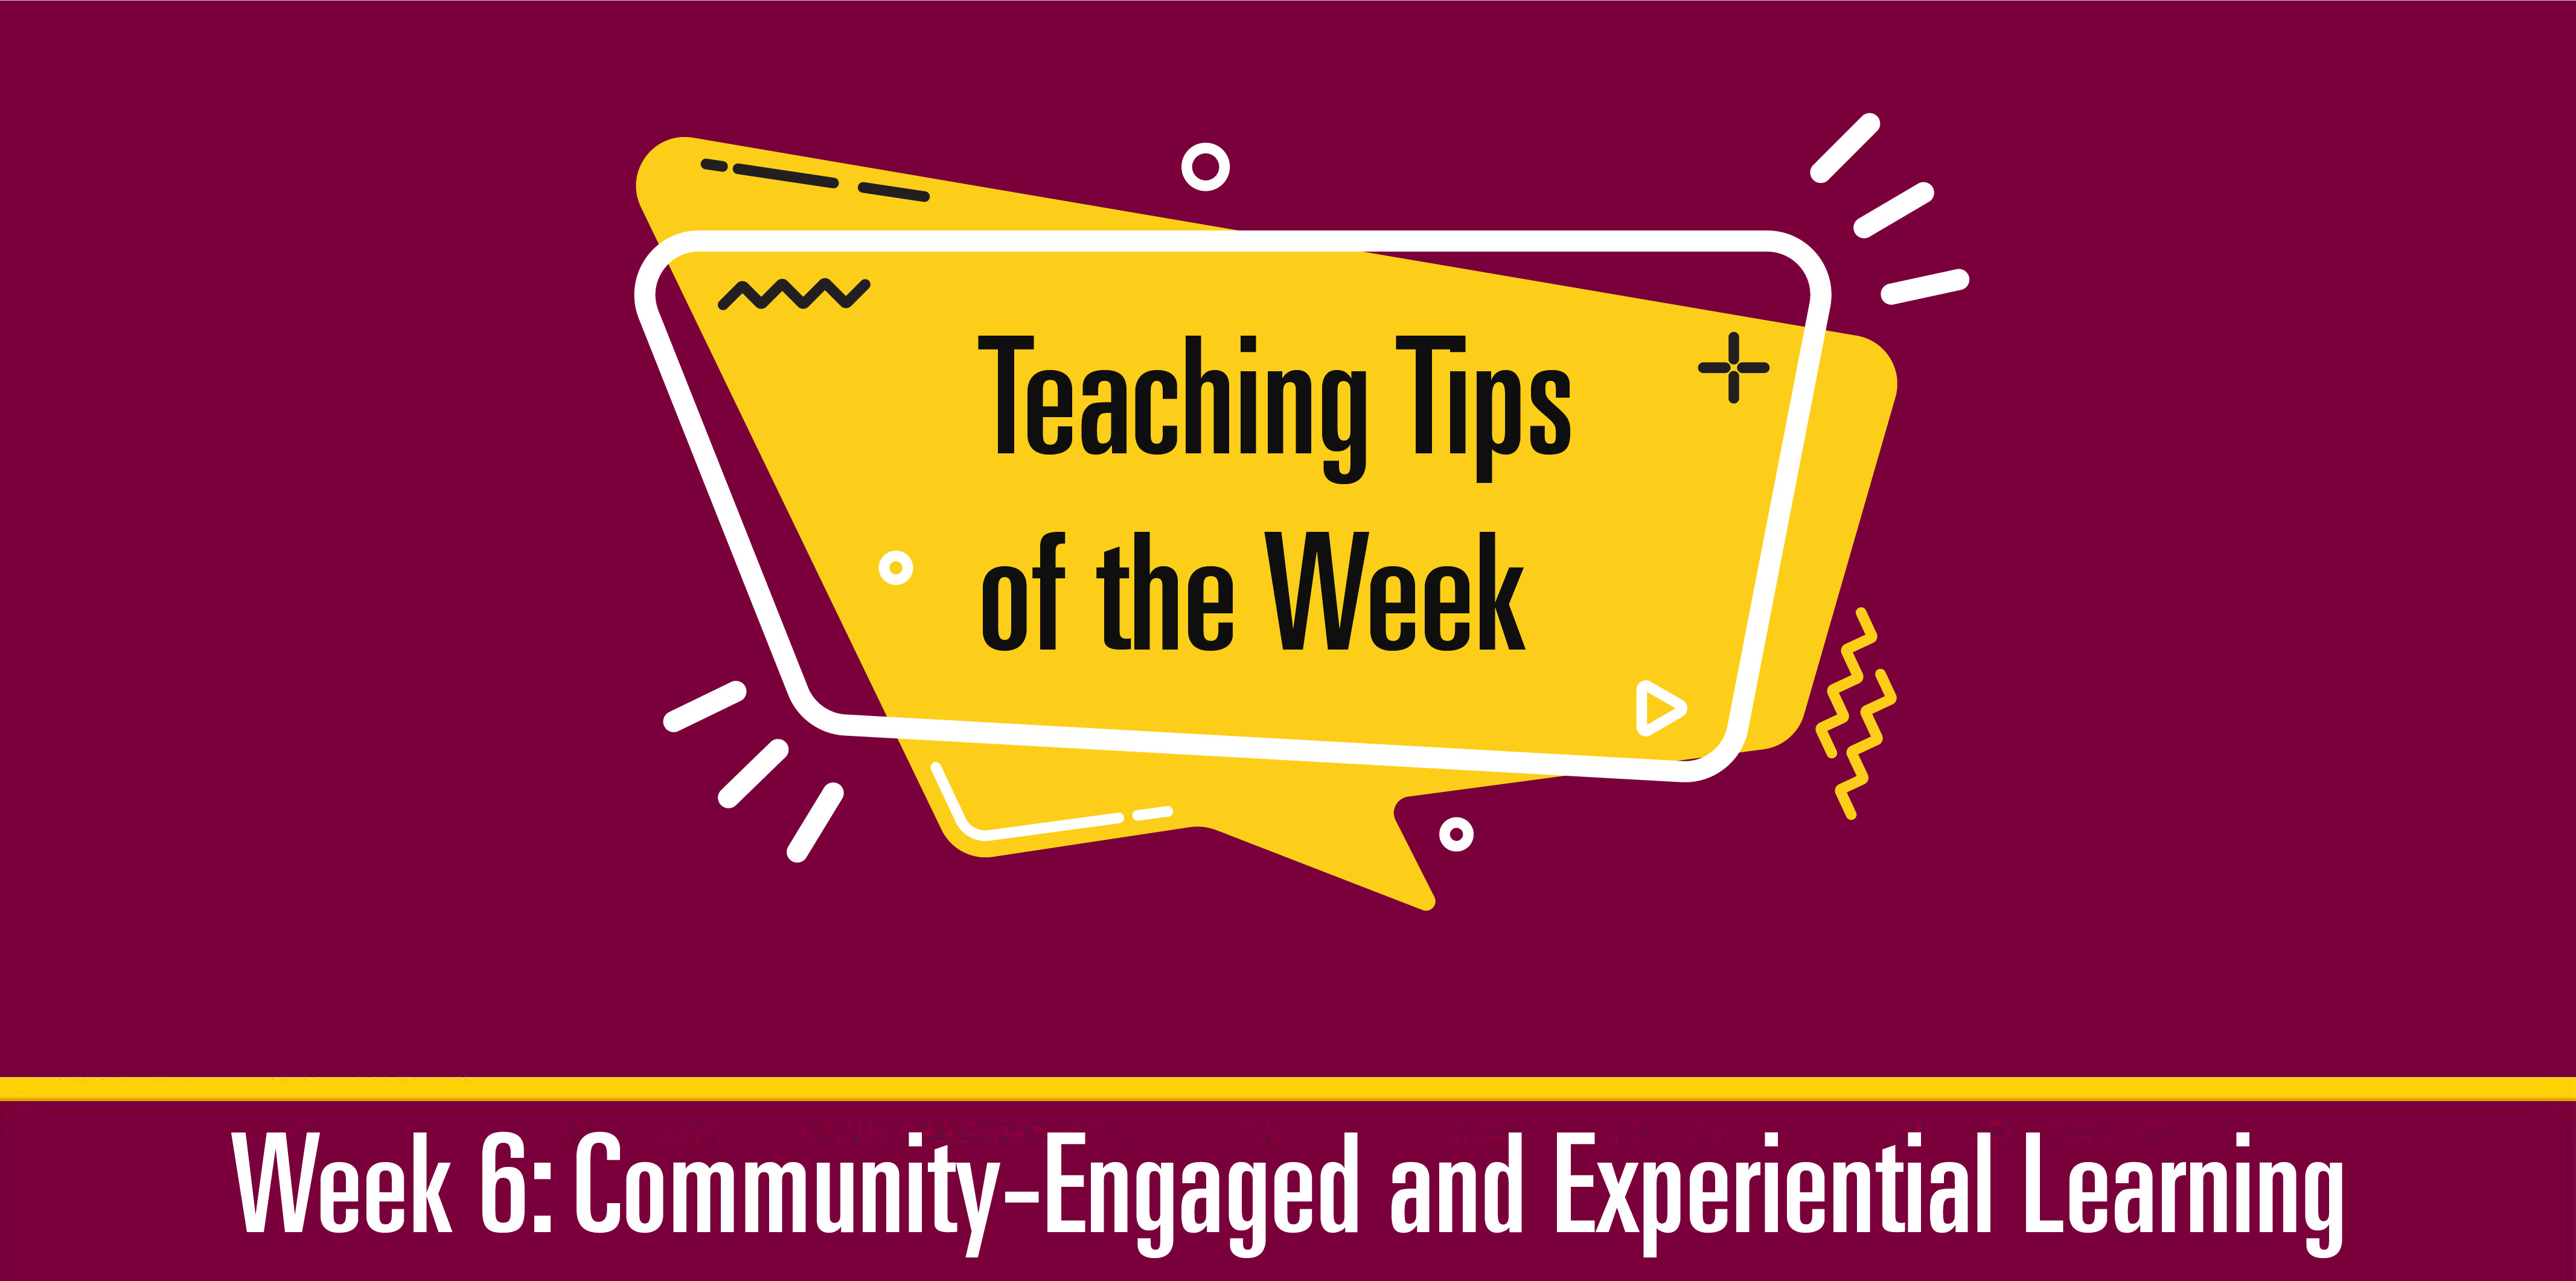 Teaching Tip of the Week Graphic